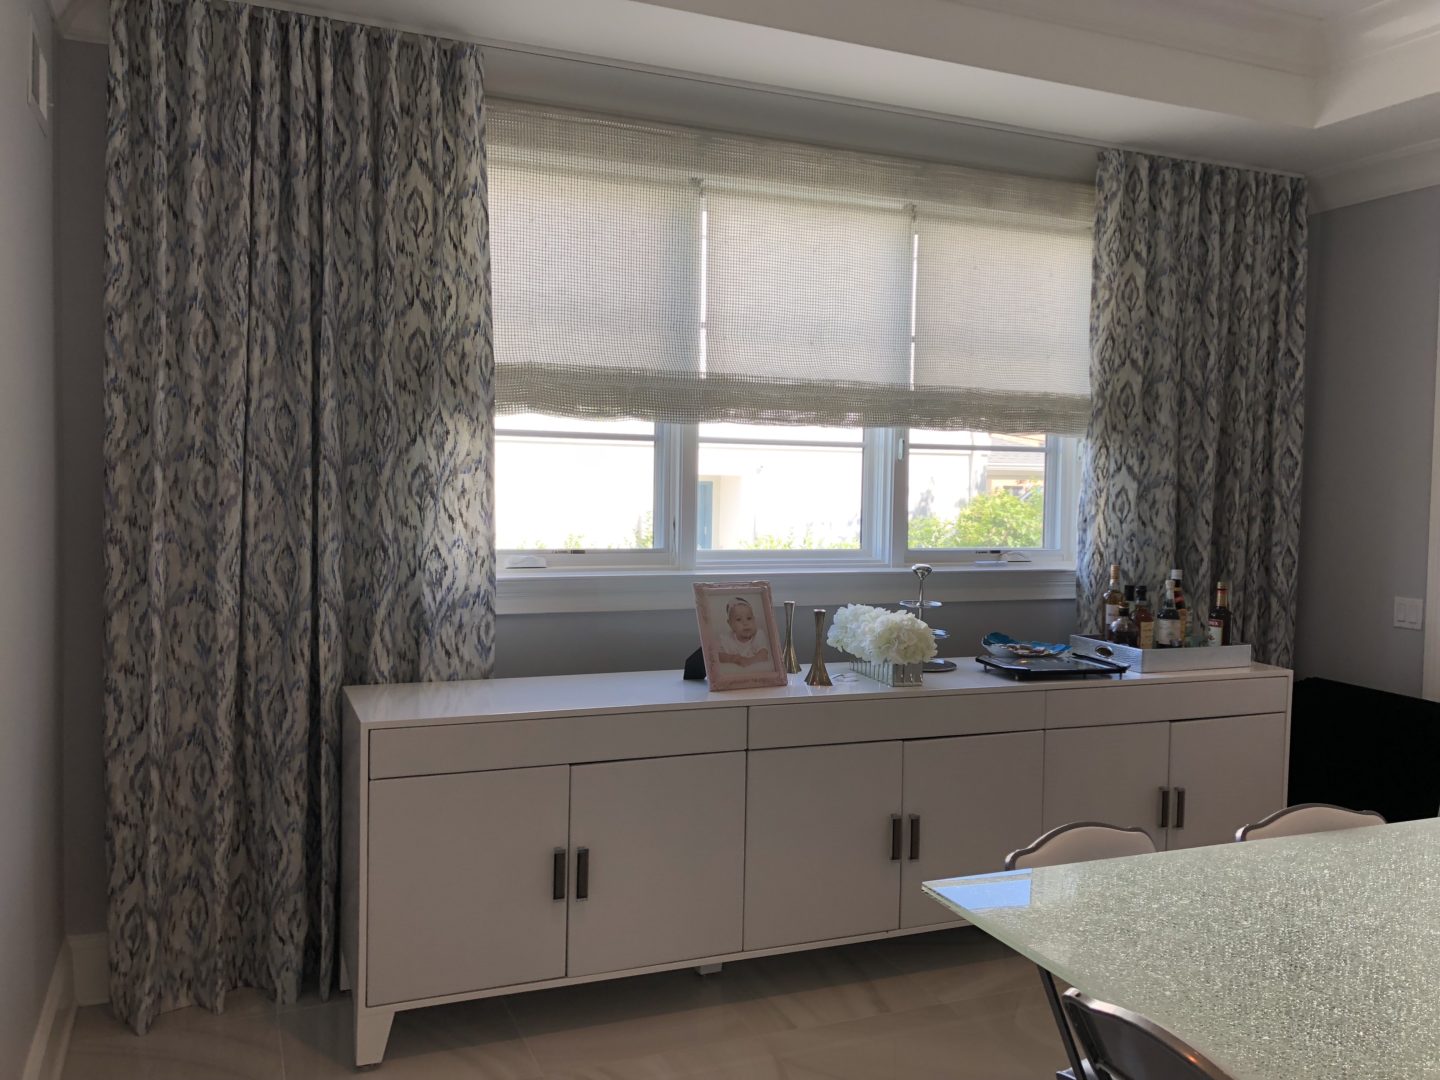 Curtains & Window Blind for Room